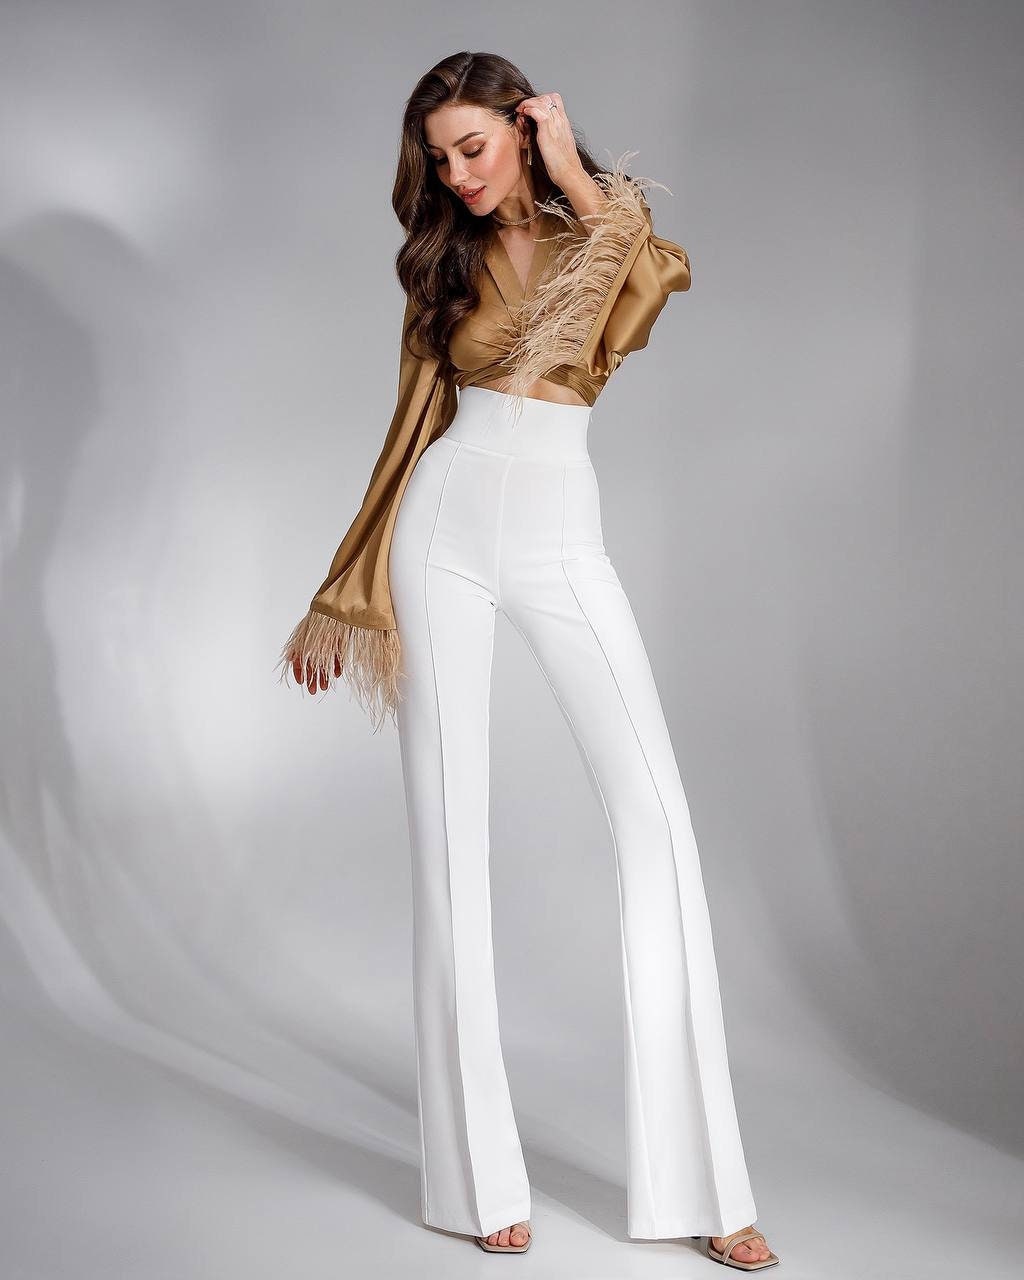 High Waist White Flare Pants, Pants for Women, Office Meeting